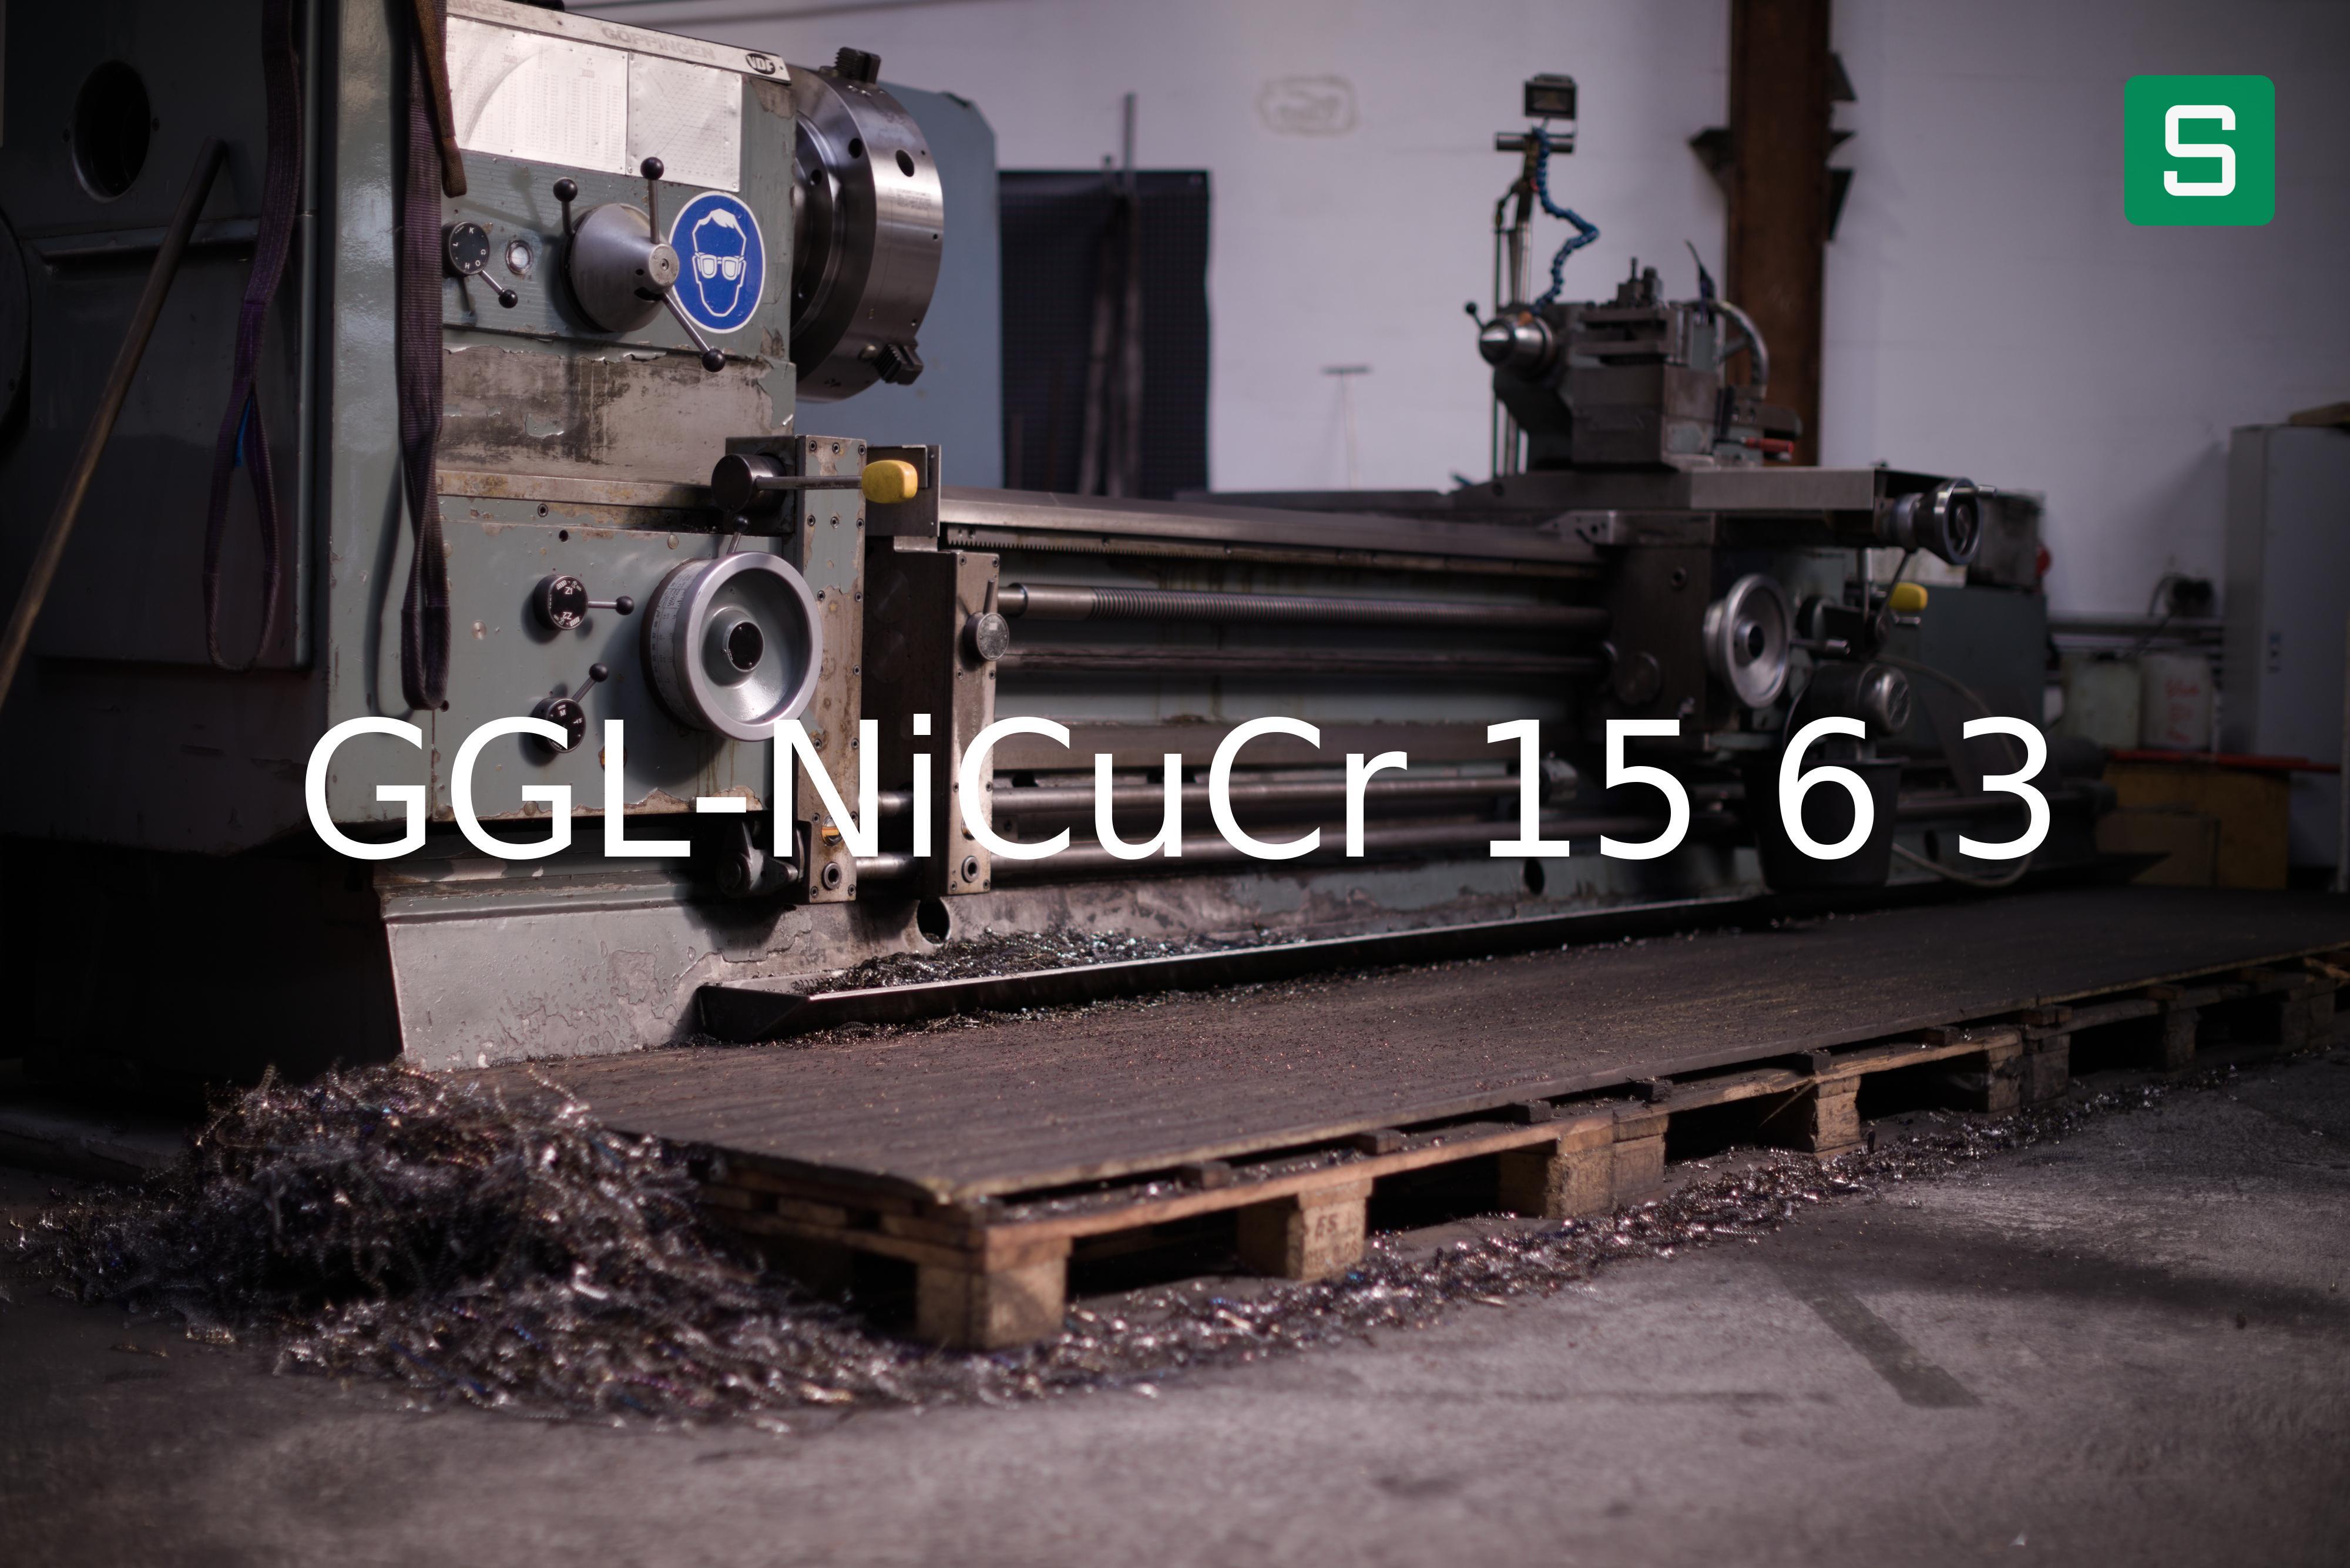 Steel Material: GGL-NiCuCr 15 6 3